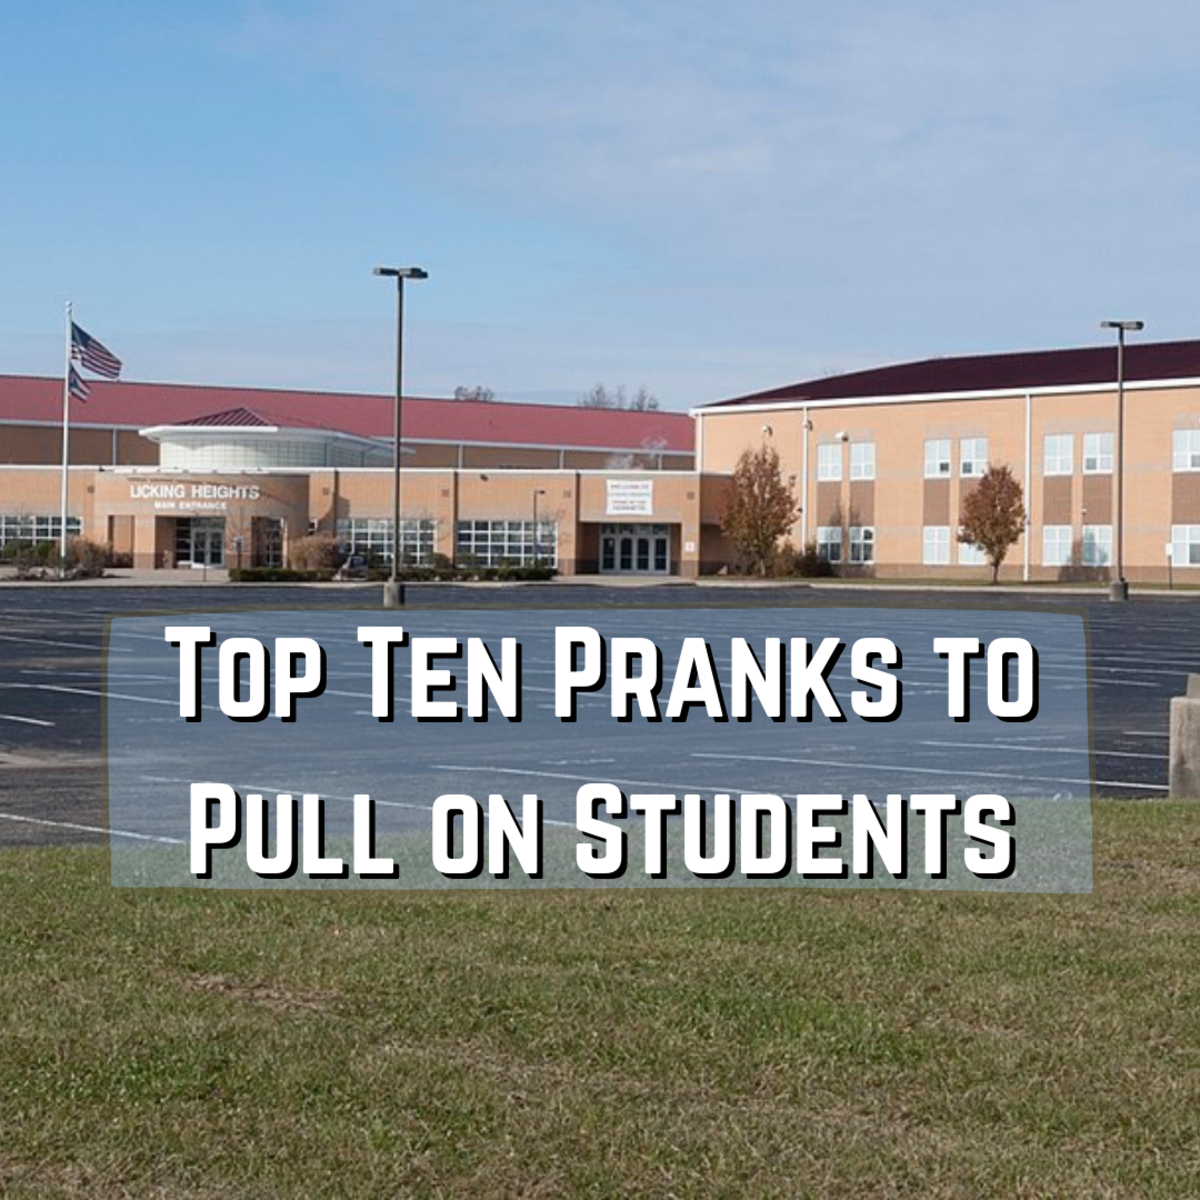 Top Ten Pranks to Pull on Students